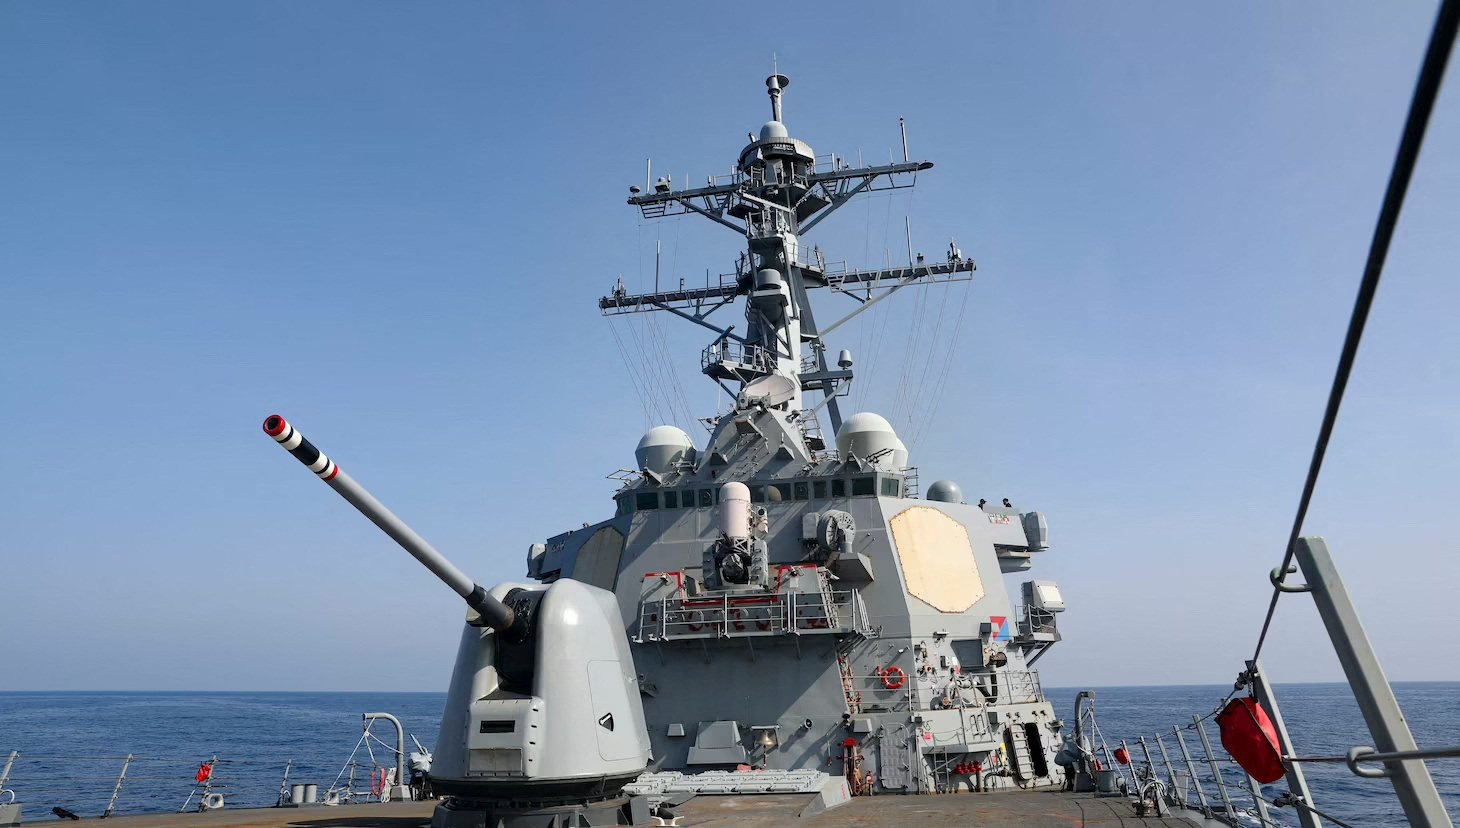 The Arleigh Burke-class guided-missile destroyer USS Milius (DDG 69), deployed to the US 7th Fleet area of operations, conducts a Taiwan Strait transit operation, at an undisclosed location on April 17, 2023. U.S. Photo: Reuters